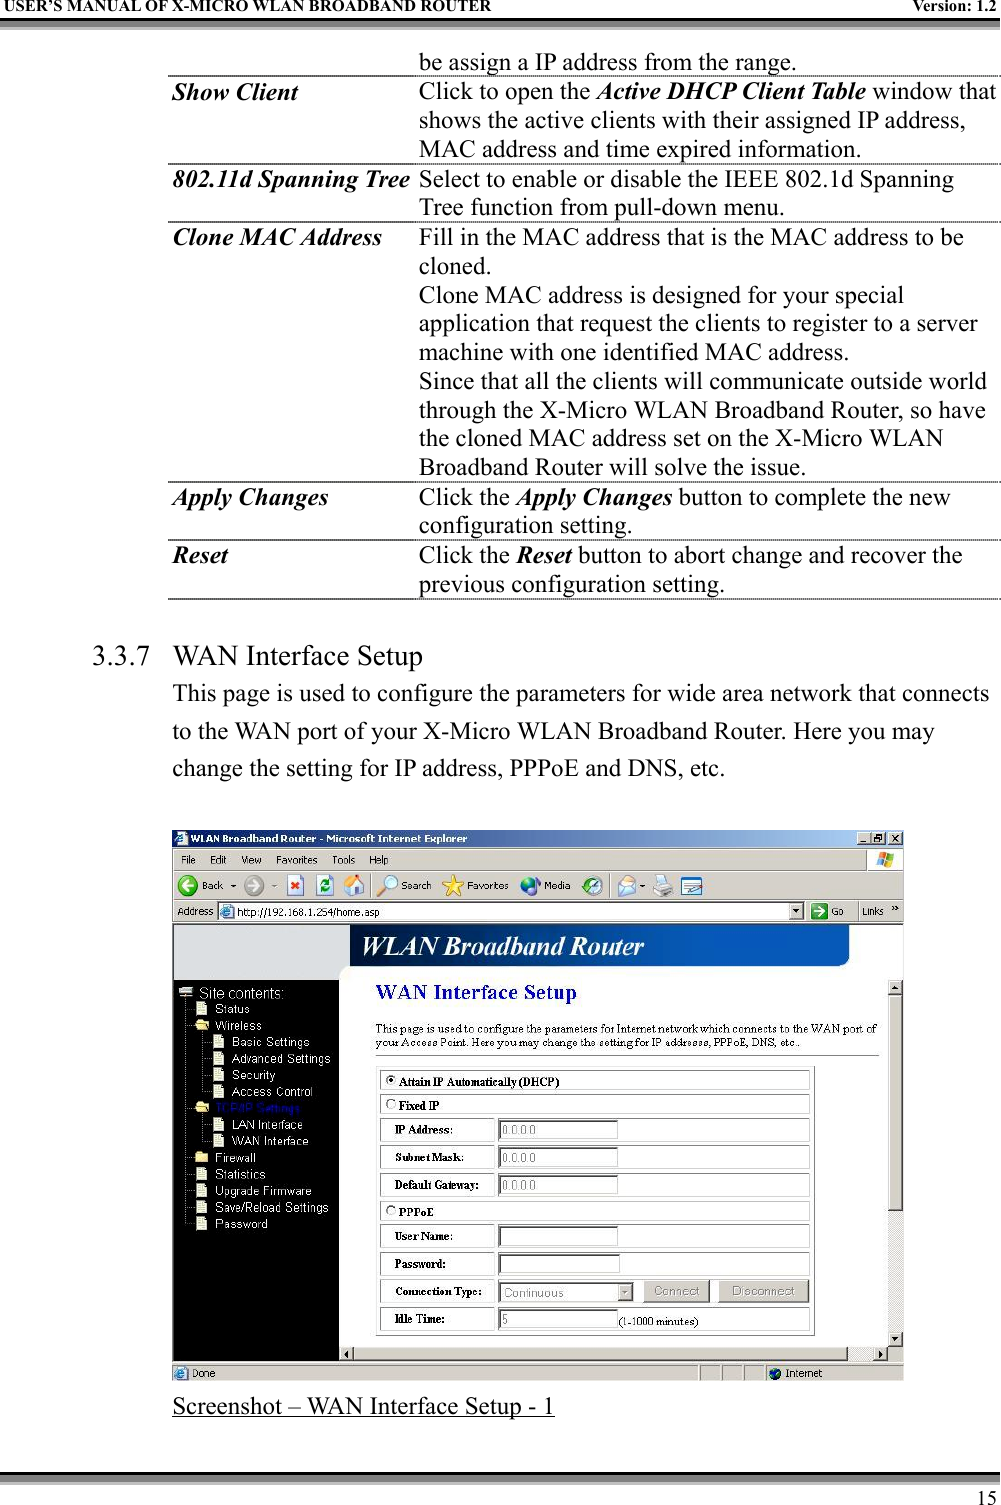 USER’S MANUAL OF X-MICRO WLAN BROADBAND ROUTER Version: 1.215be assign a IP address from the range.Show Client Click to open the Active DHCP Client Table window thatshows the active clients with their assigned IP address,MAC address and time expired information.802.11d Spanning Tree Select to enable or disable the IEEE 802.1d SpanningTree function from pull-down menu.Clone MAC Address Fill in the MAC address that is the MAC address to becloned.Clone MAC address is designed for your specialapplication that request the clients to register to a servermachine with one identified MAC address.Since that all the clients will communicate outside worldthrough the X-Micro WLAN Broadband Router, so havethe cloned MAC address set on the X-Micro WLANBroadband Router will solve the issue.Apply Changes Click the Apply Changes button to complete the newconfiguration setting.Reset Click the Reset button to abort change and recover theprevious configuration setting.3.3.7 WAN Interface SetupThis page is used to configure the parameters for wide area network that connectsto the WAN port of your X-Micro WLAN Broadband Router. Here you maychange the setting for IP address, PPPoE and DNS, etc.Screenshot – WAN Interface Setup - 1